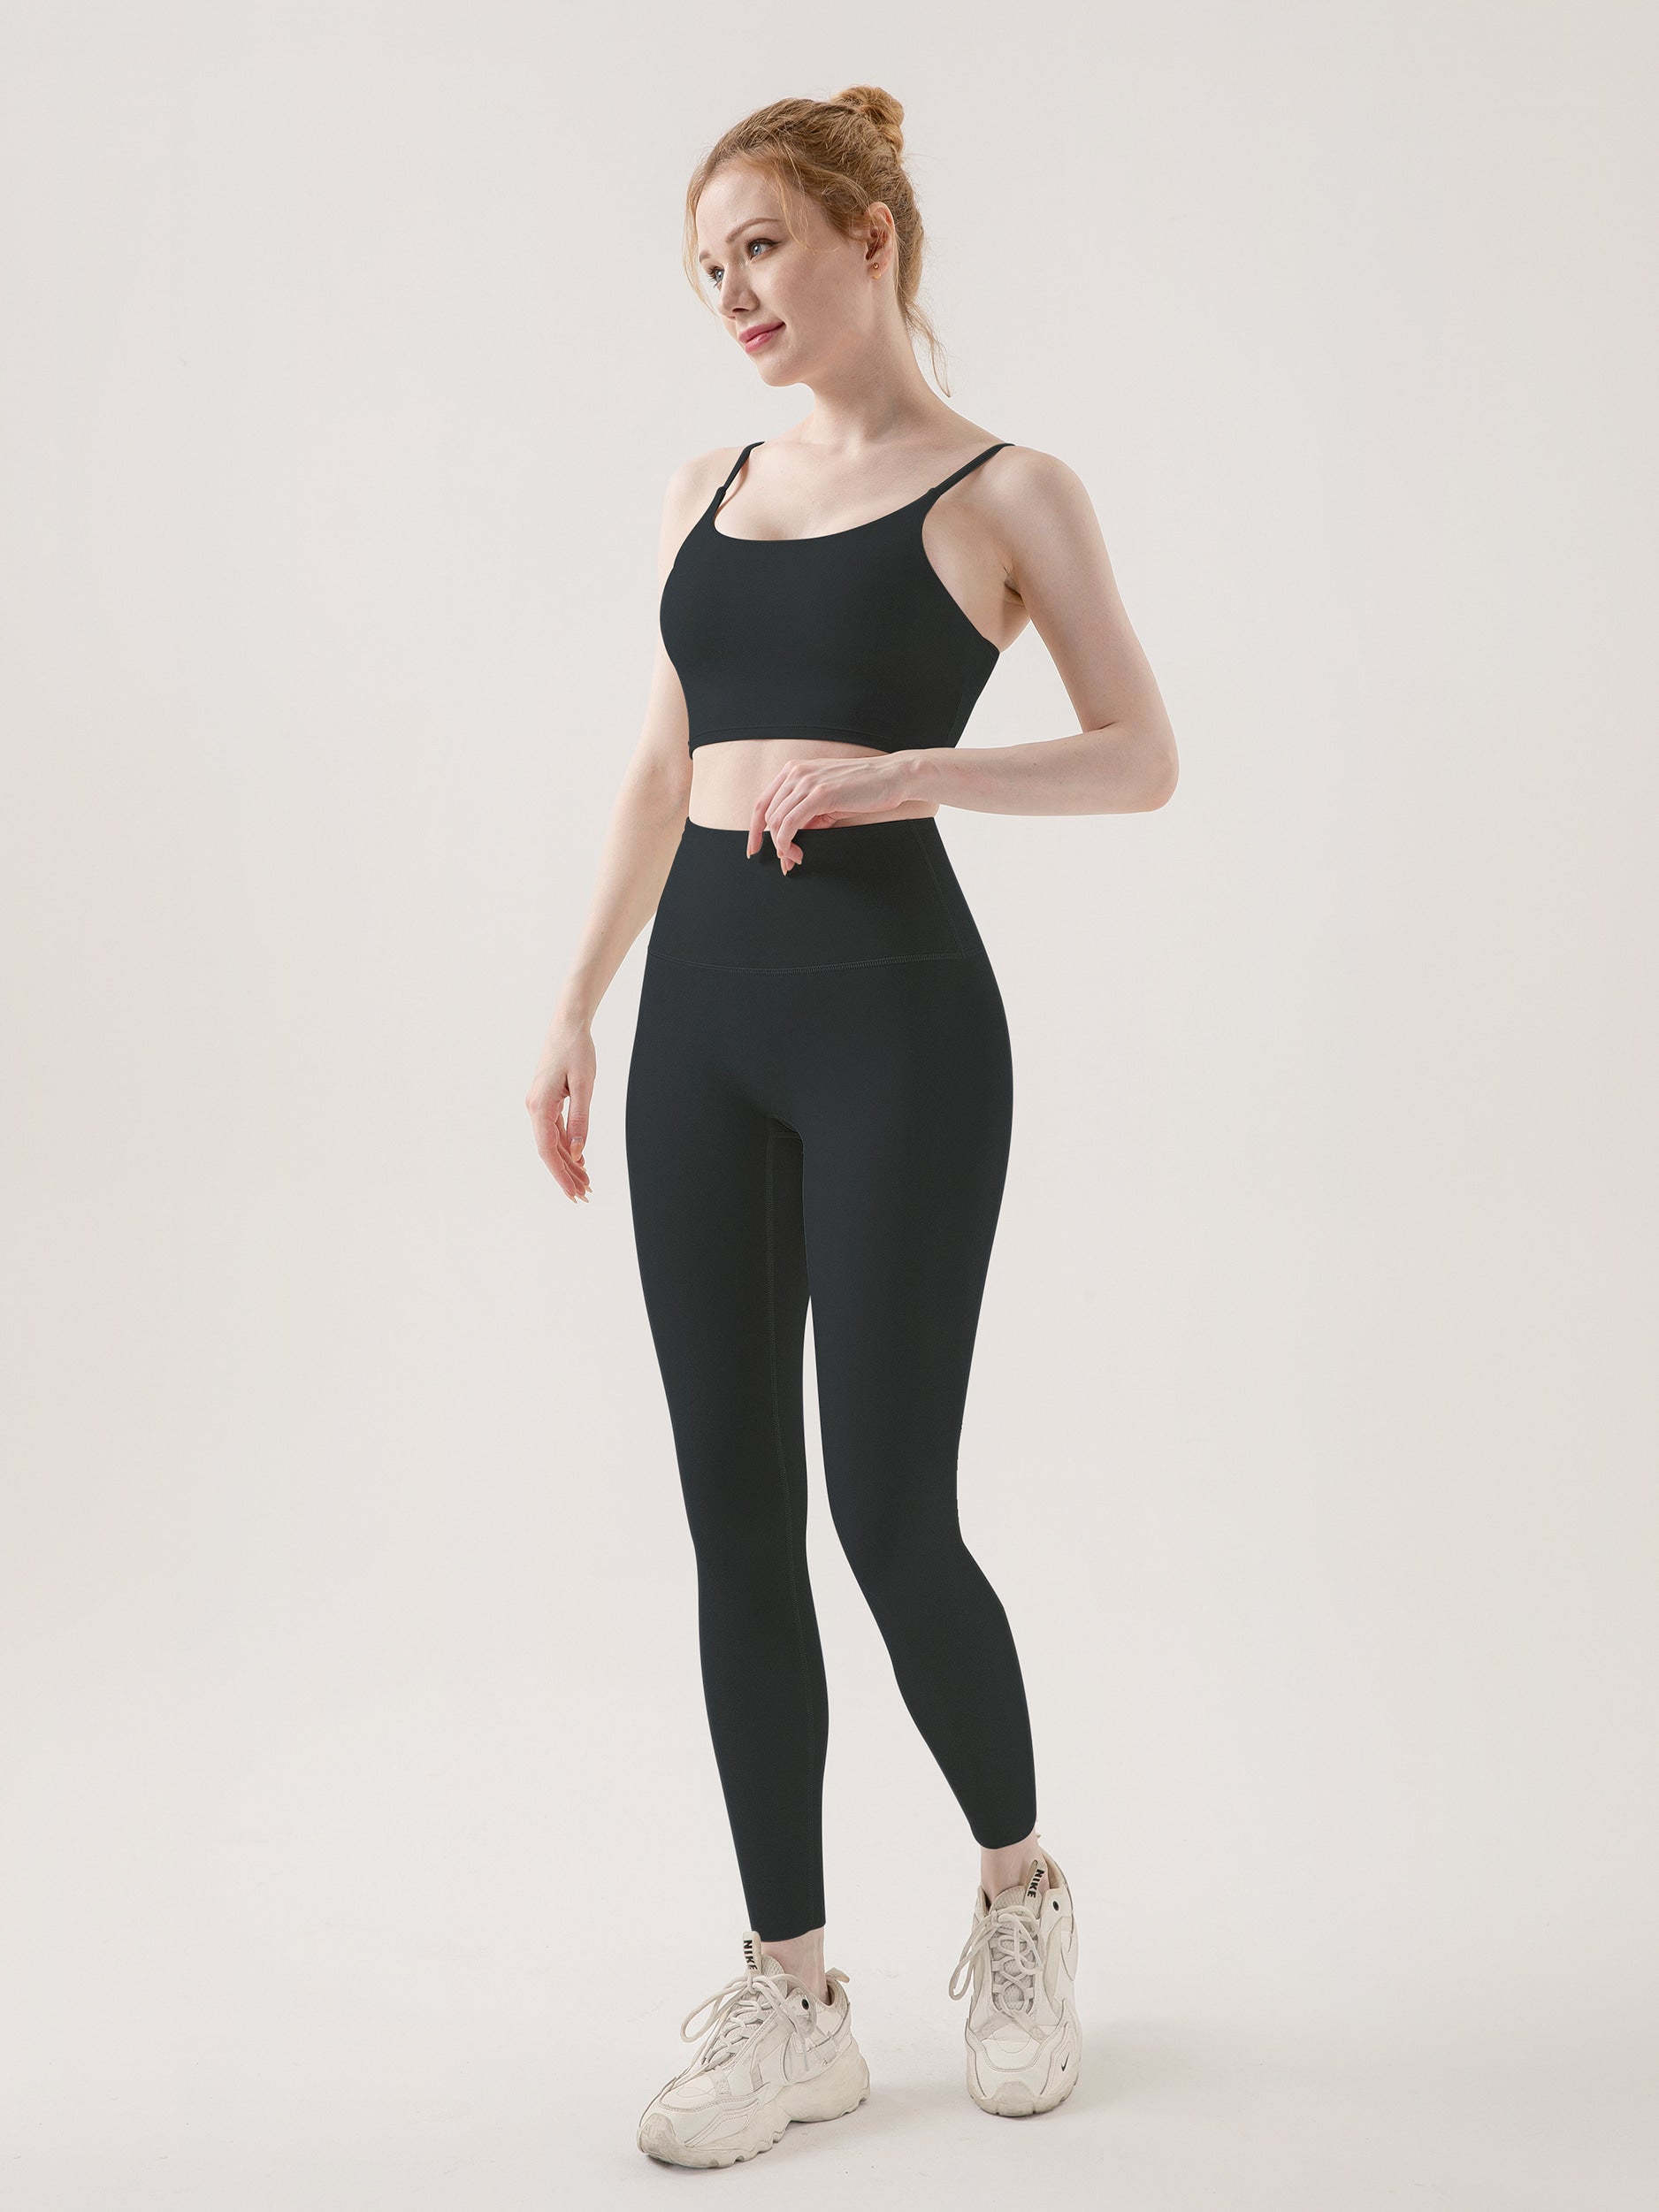 Girls Power Leggings - Black: Unleash Your Power in Style – Click Holic  Activewear